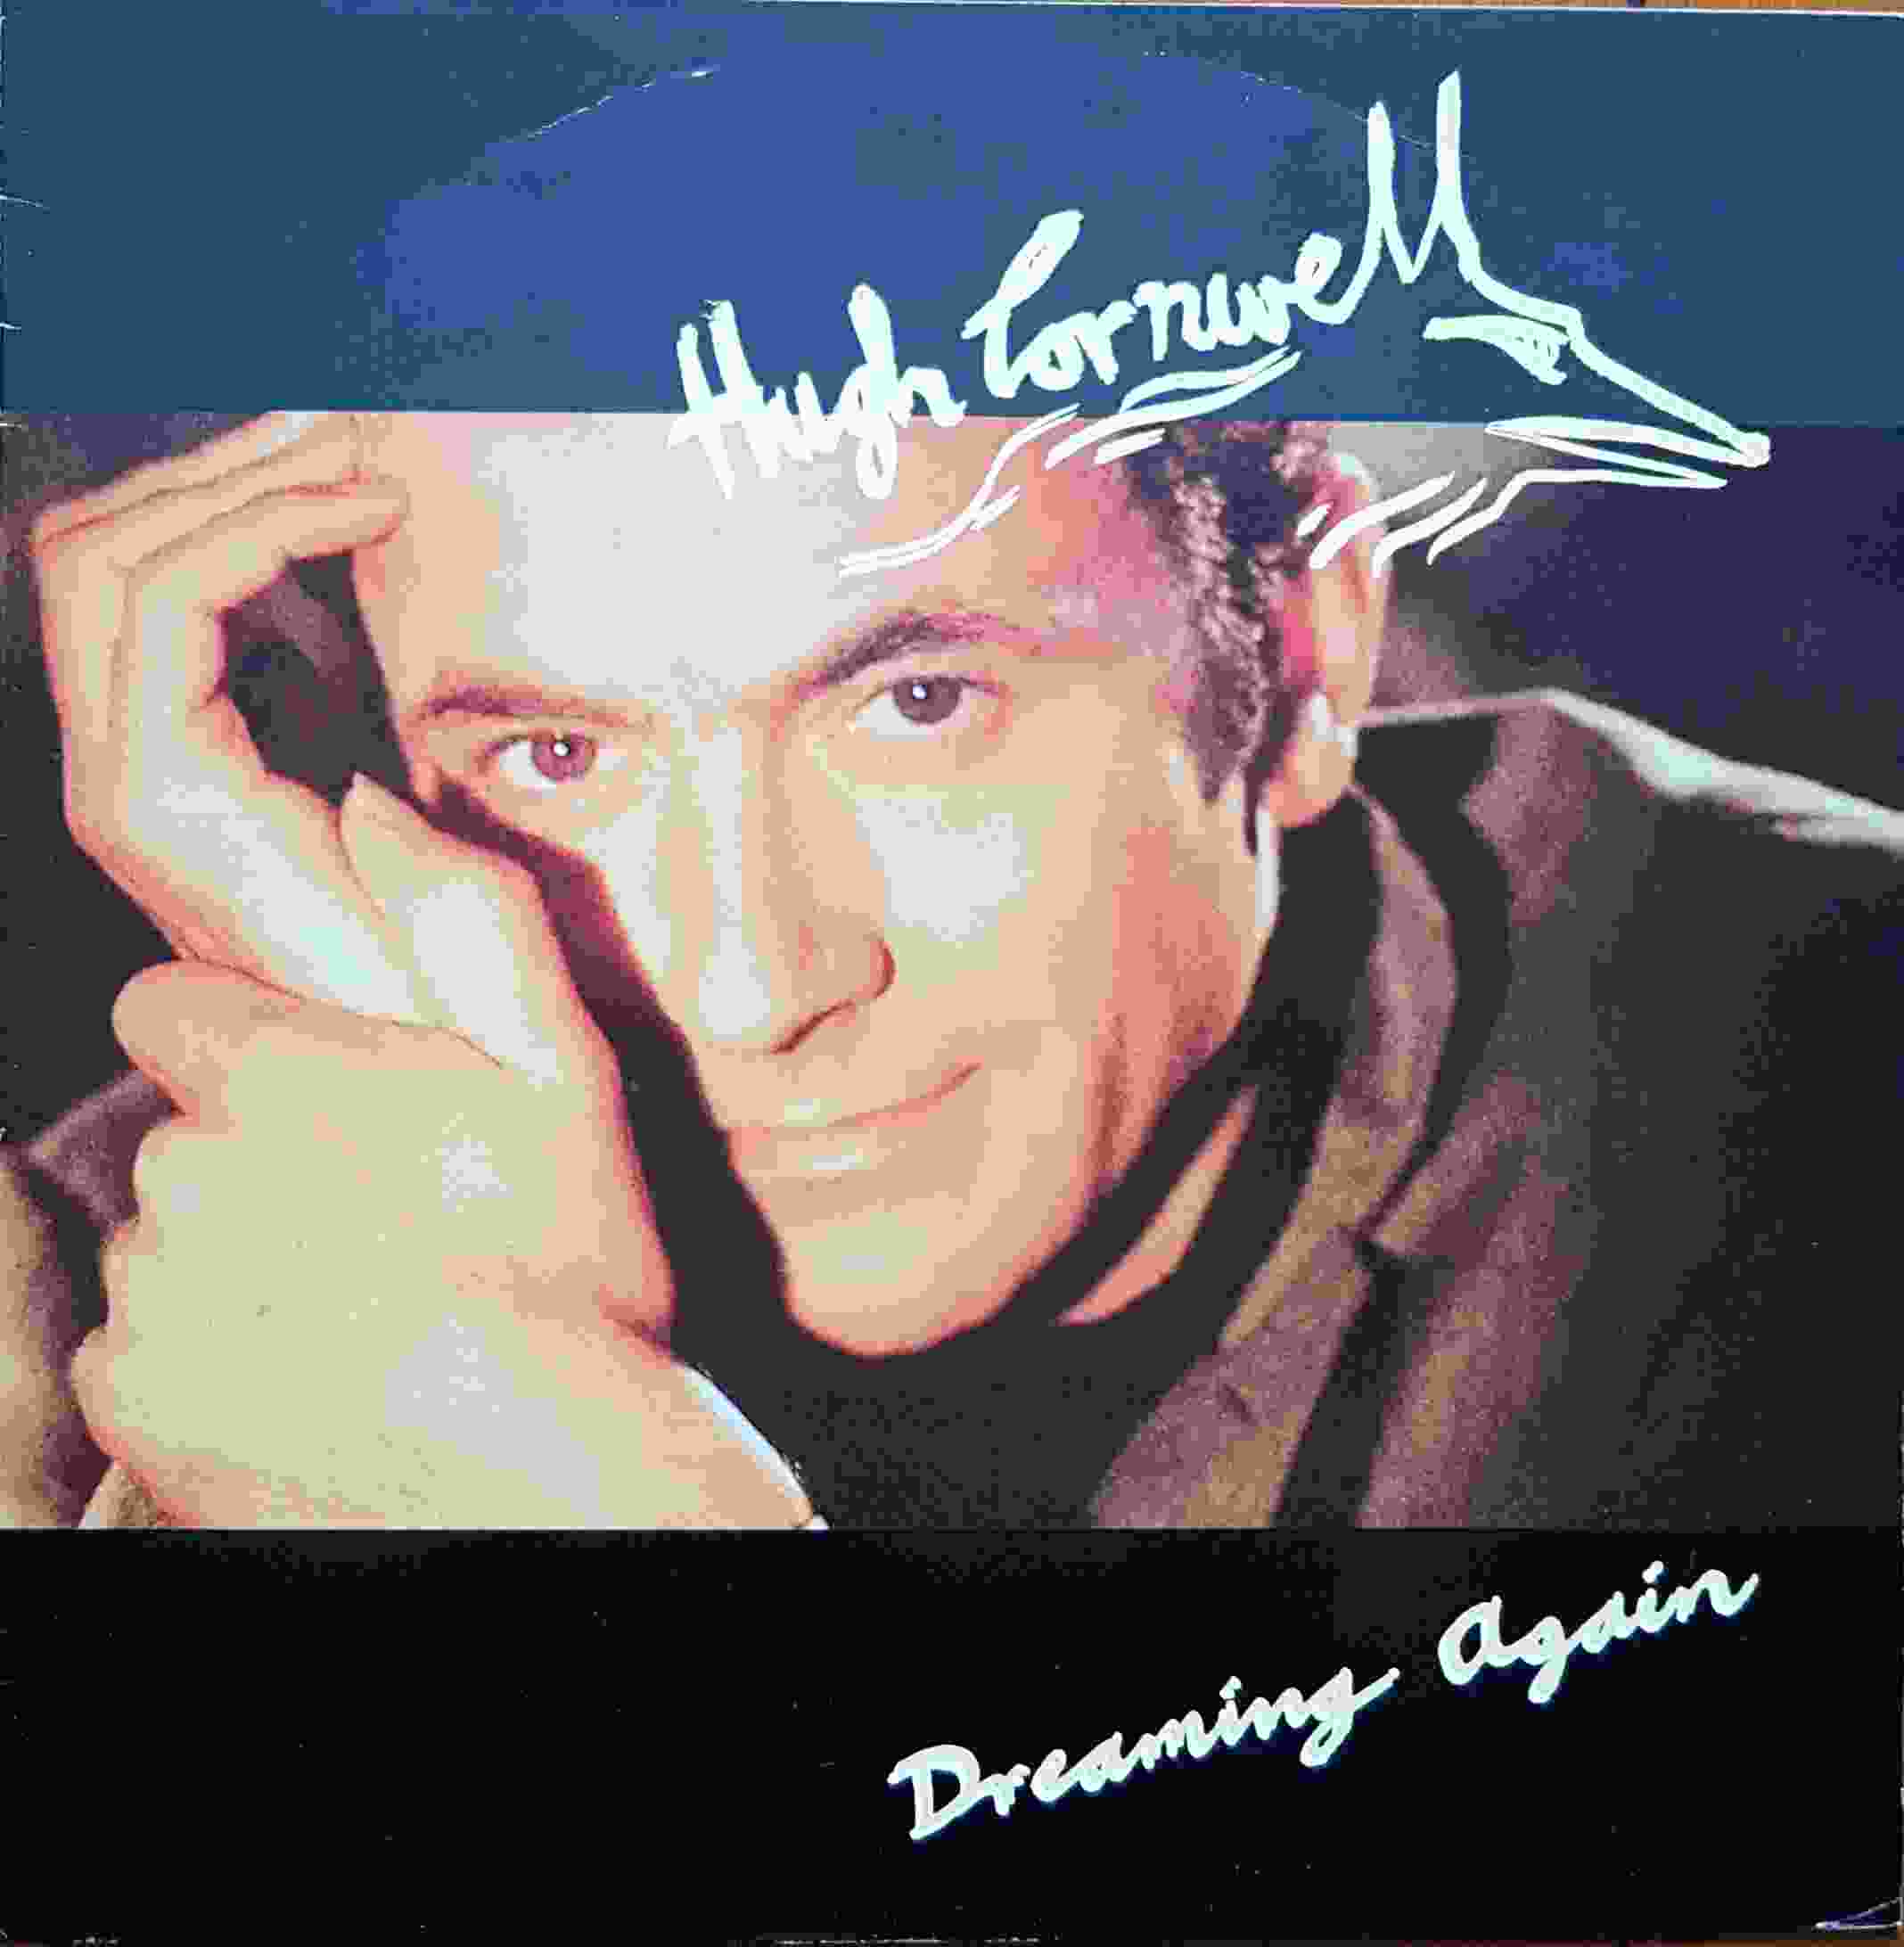 Picture of VST 1093 Dreaming again by artist Hugh Cornwell  from The Stranglers 12inches